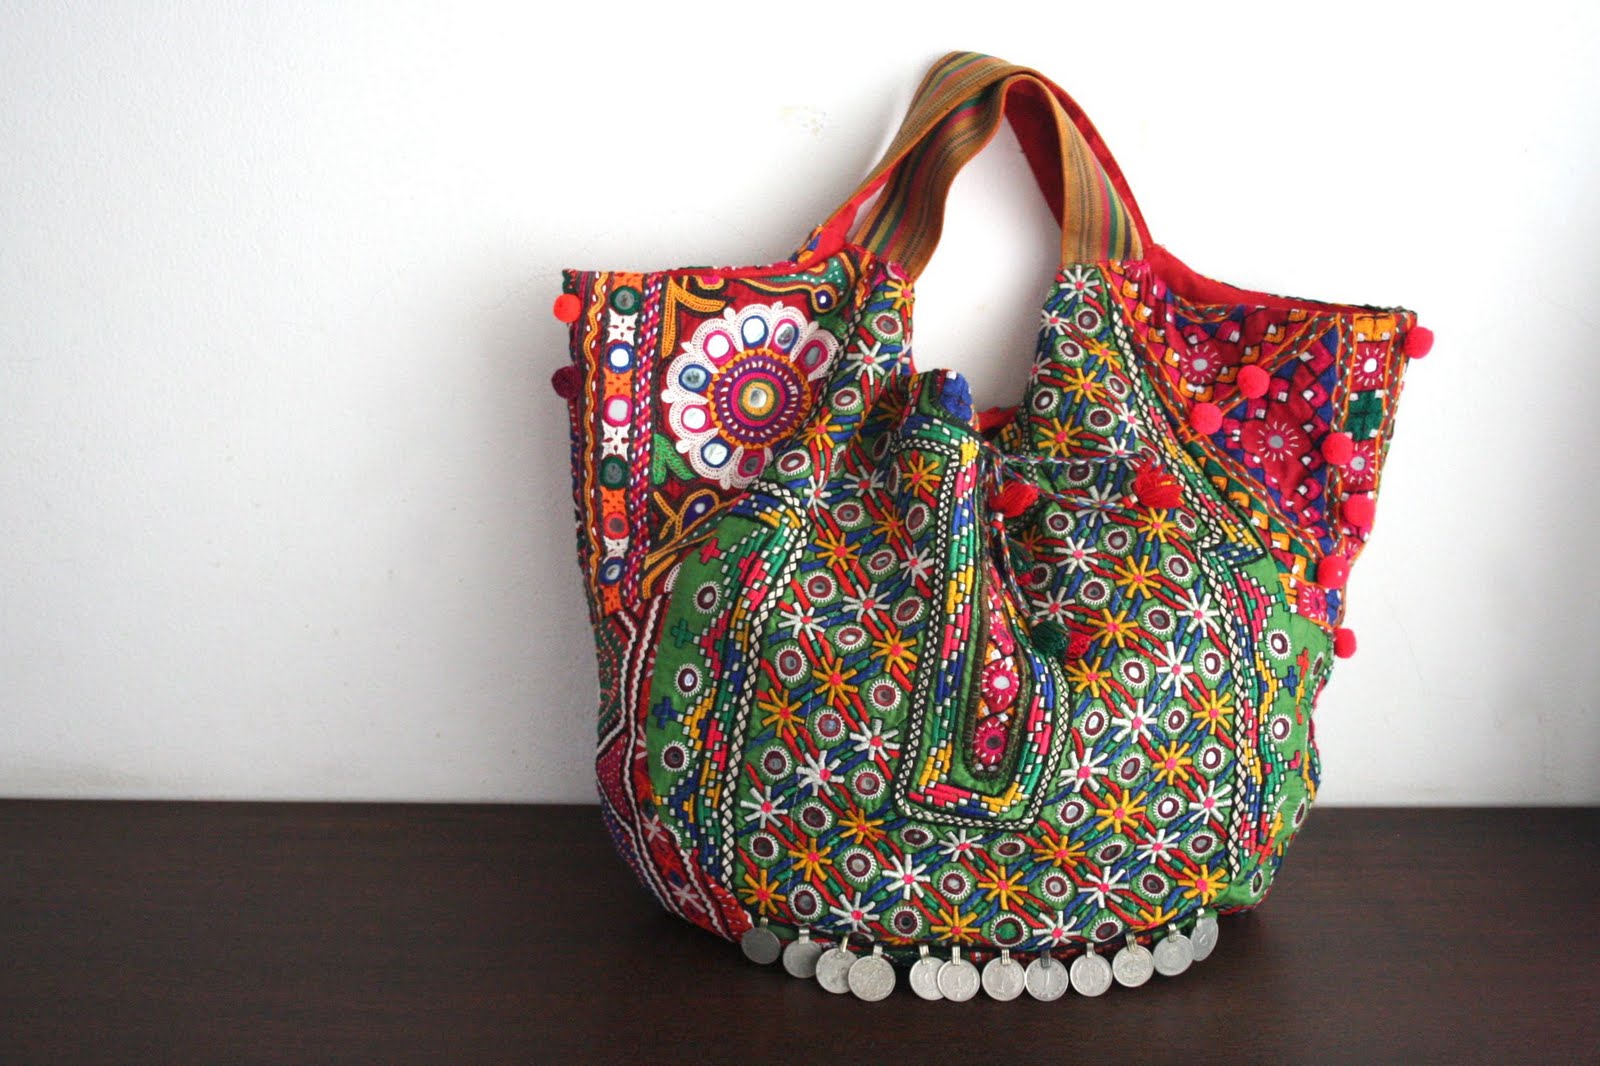 Dazzling Lanna Ethnic bags shop: New patchwork bags from Indian / Afghan fabric